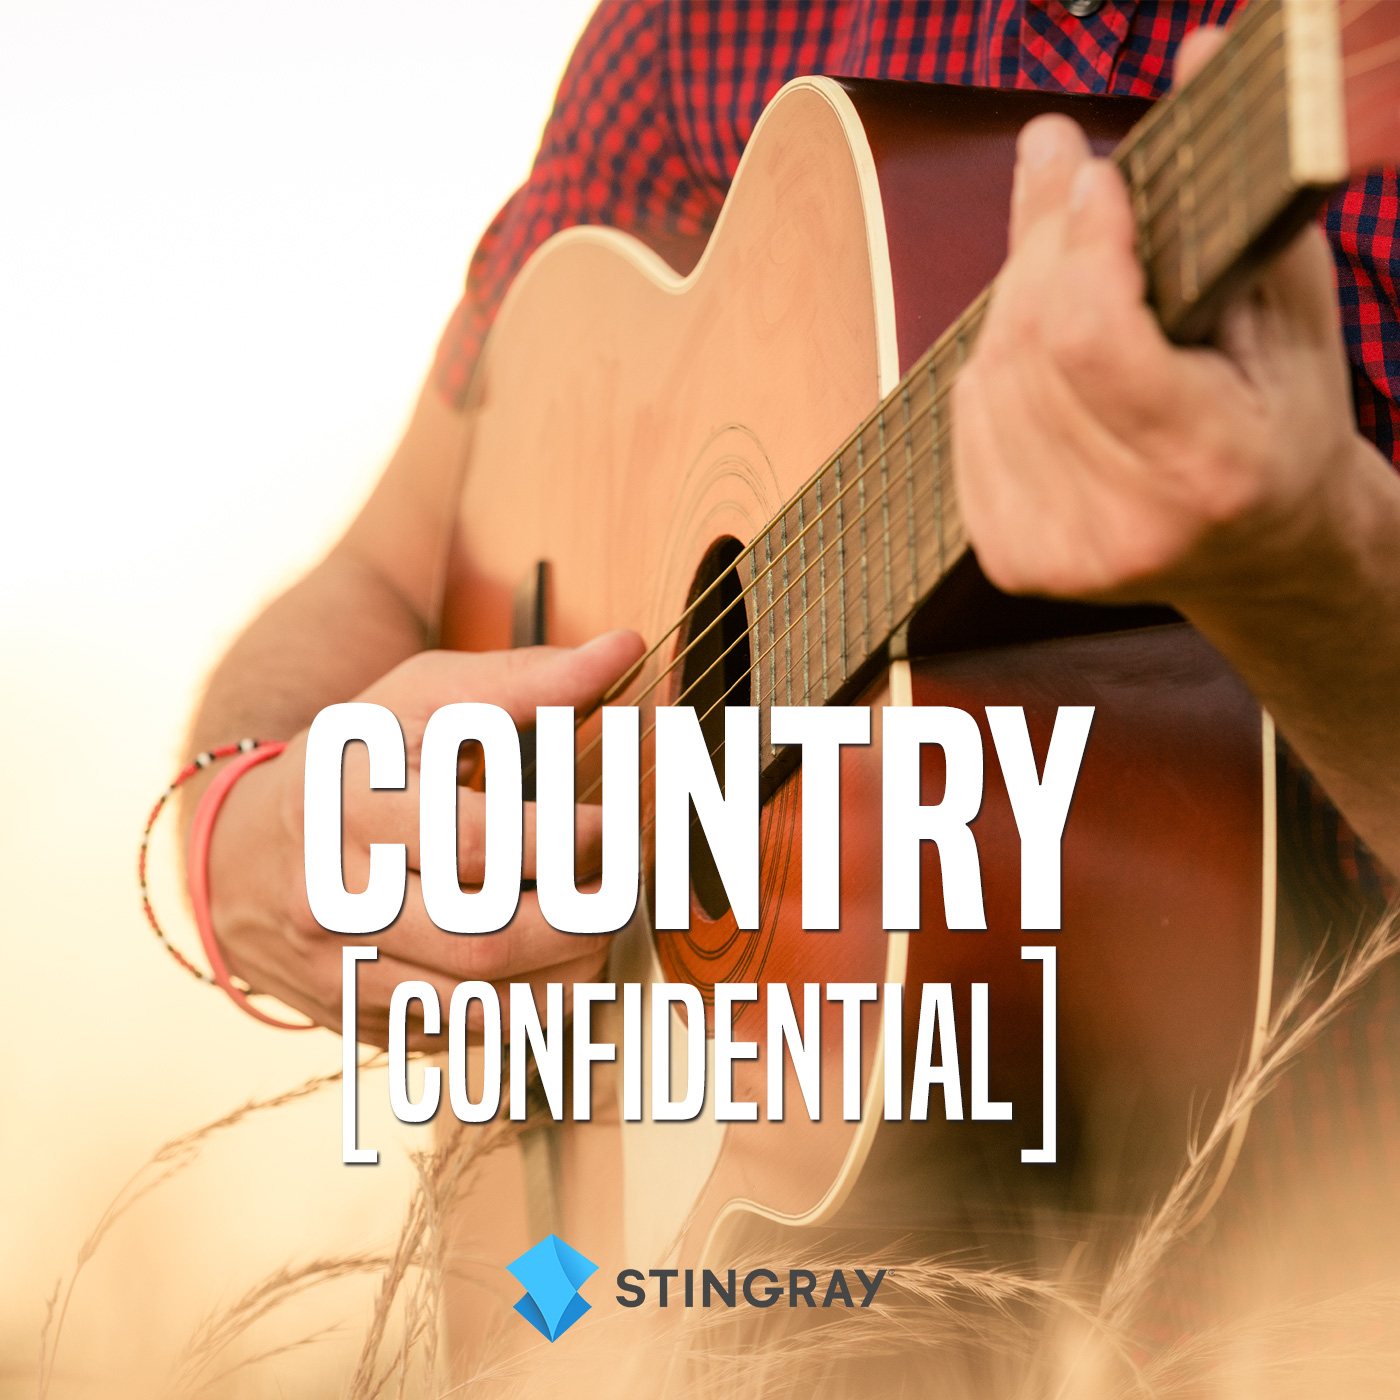 Country Confidential - The Christmas Episode!